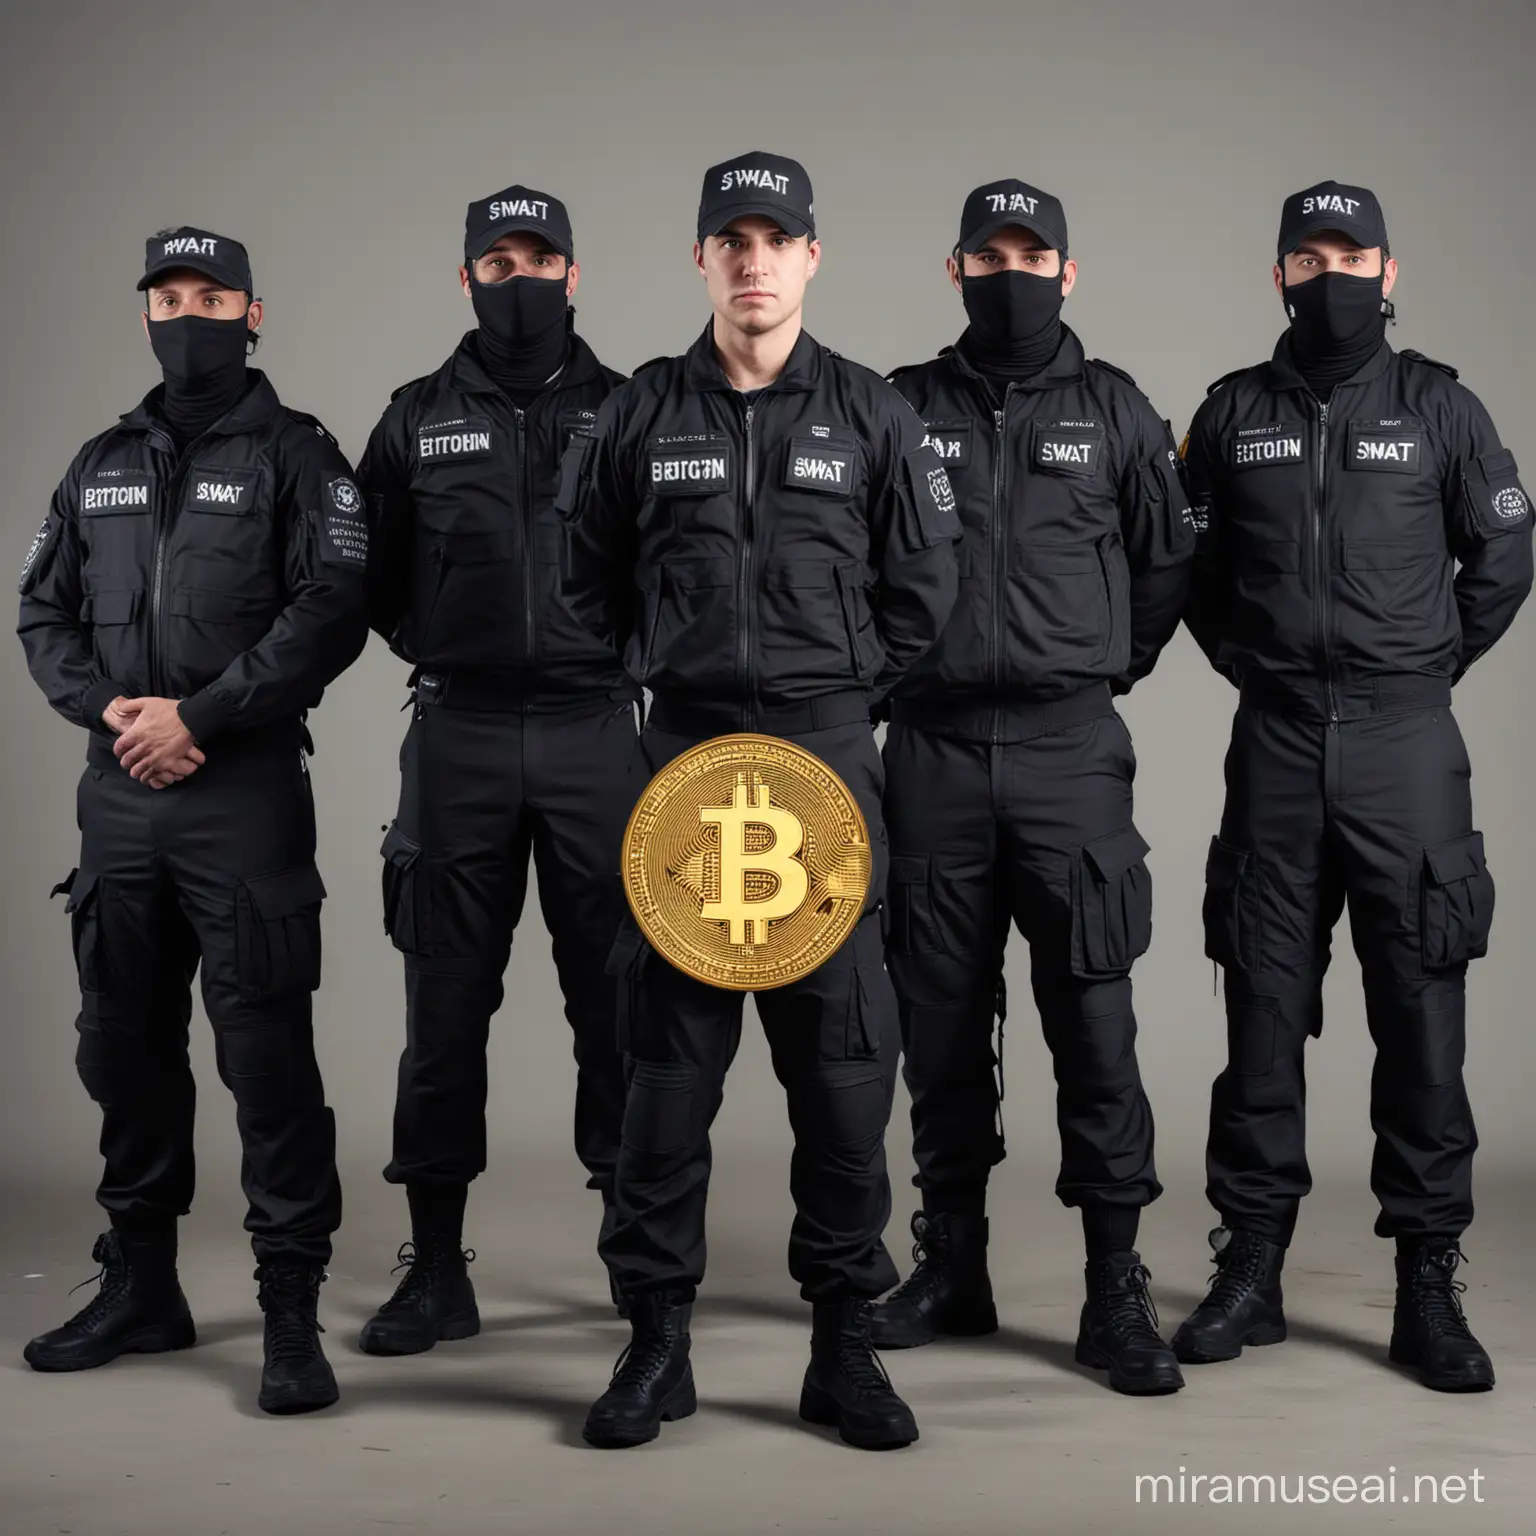 Swat 6 members and
Bitcoin written in uniform  (whole body )
